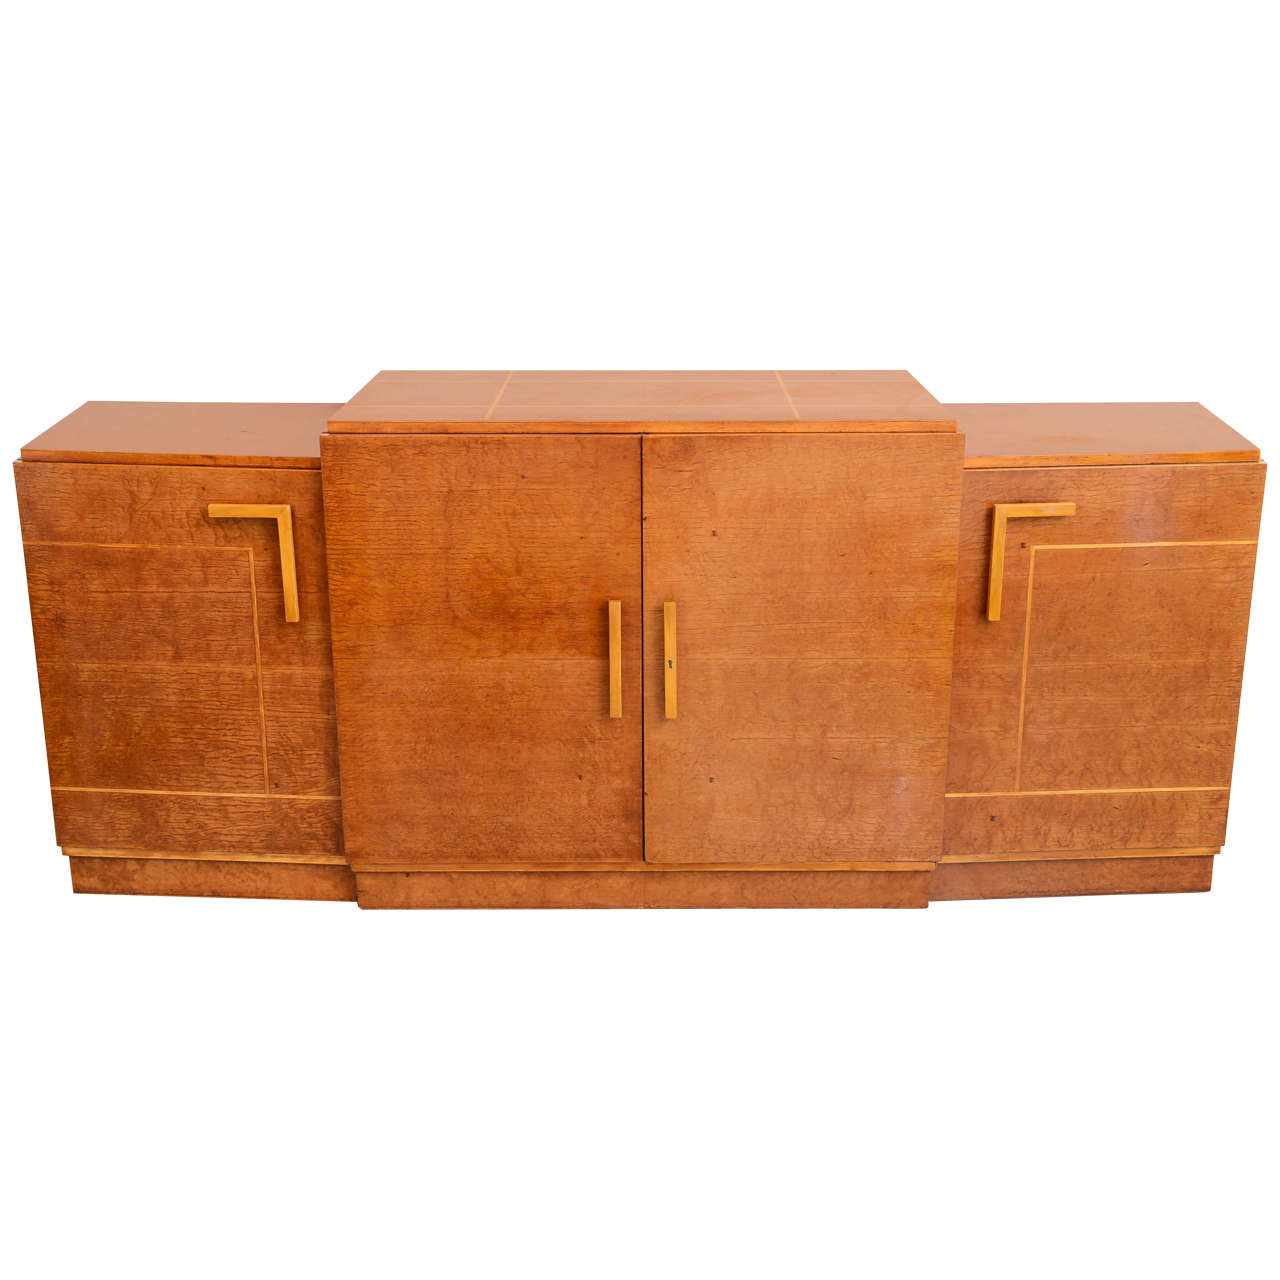 Late Art Deco Birds-Eye Maple and Maple Inlaid Credenza, Eli Jacques Kahn For Sale